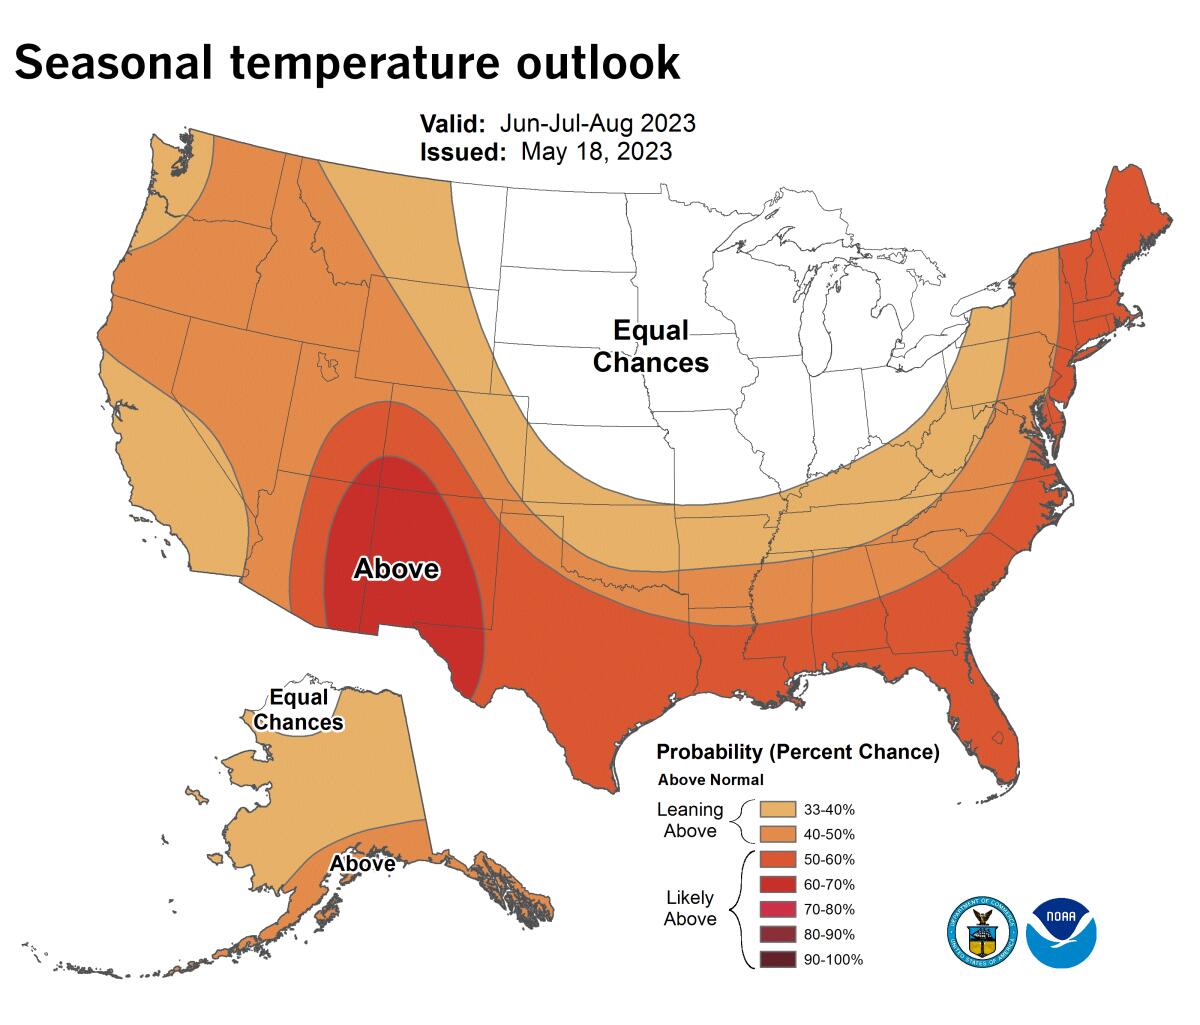 Map showing higher than normal temperatures in majority of the southern, eastern and western states.